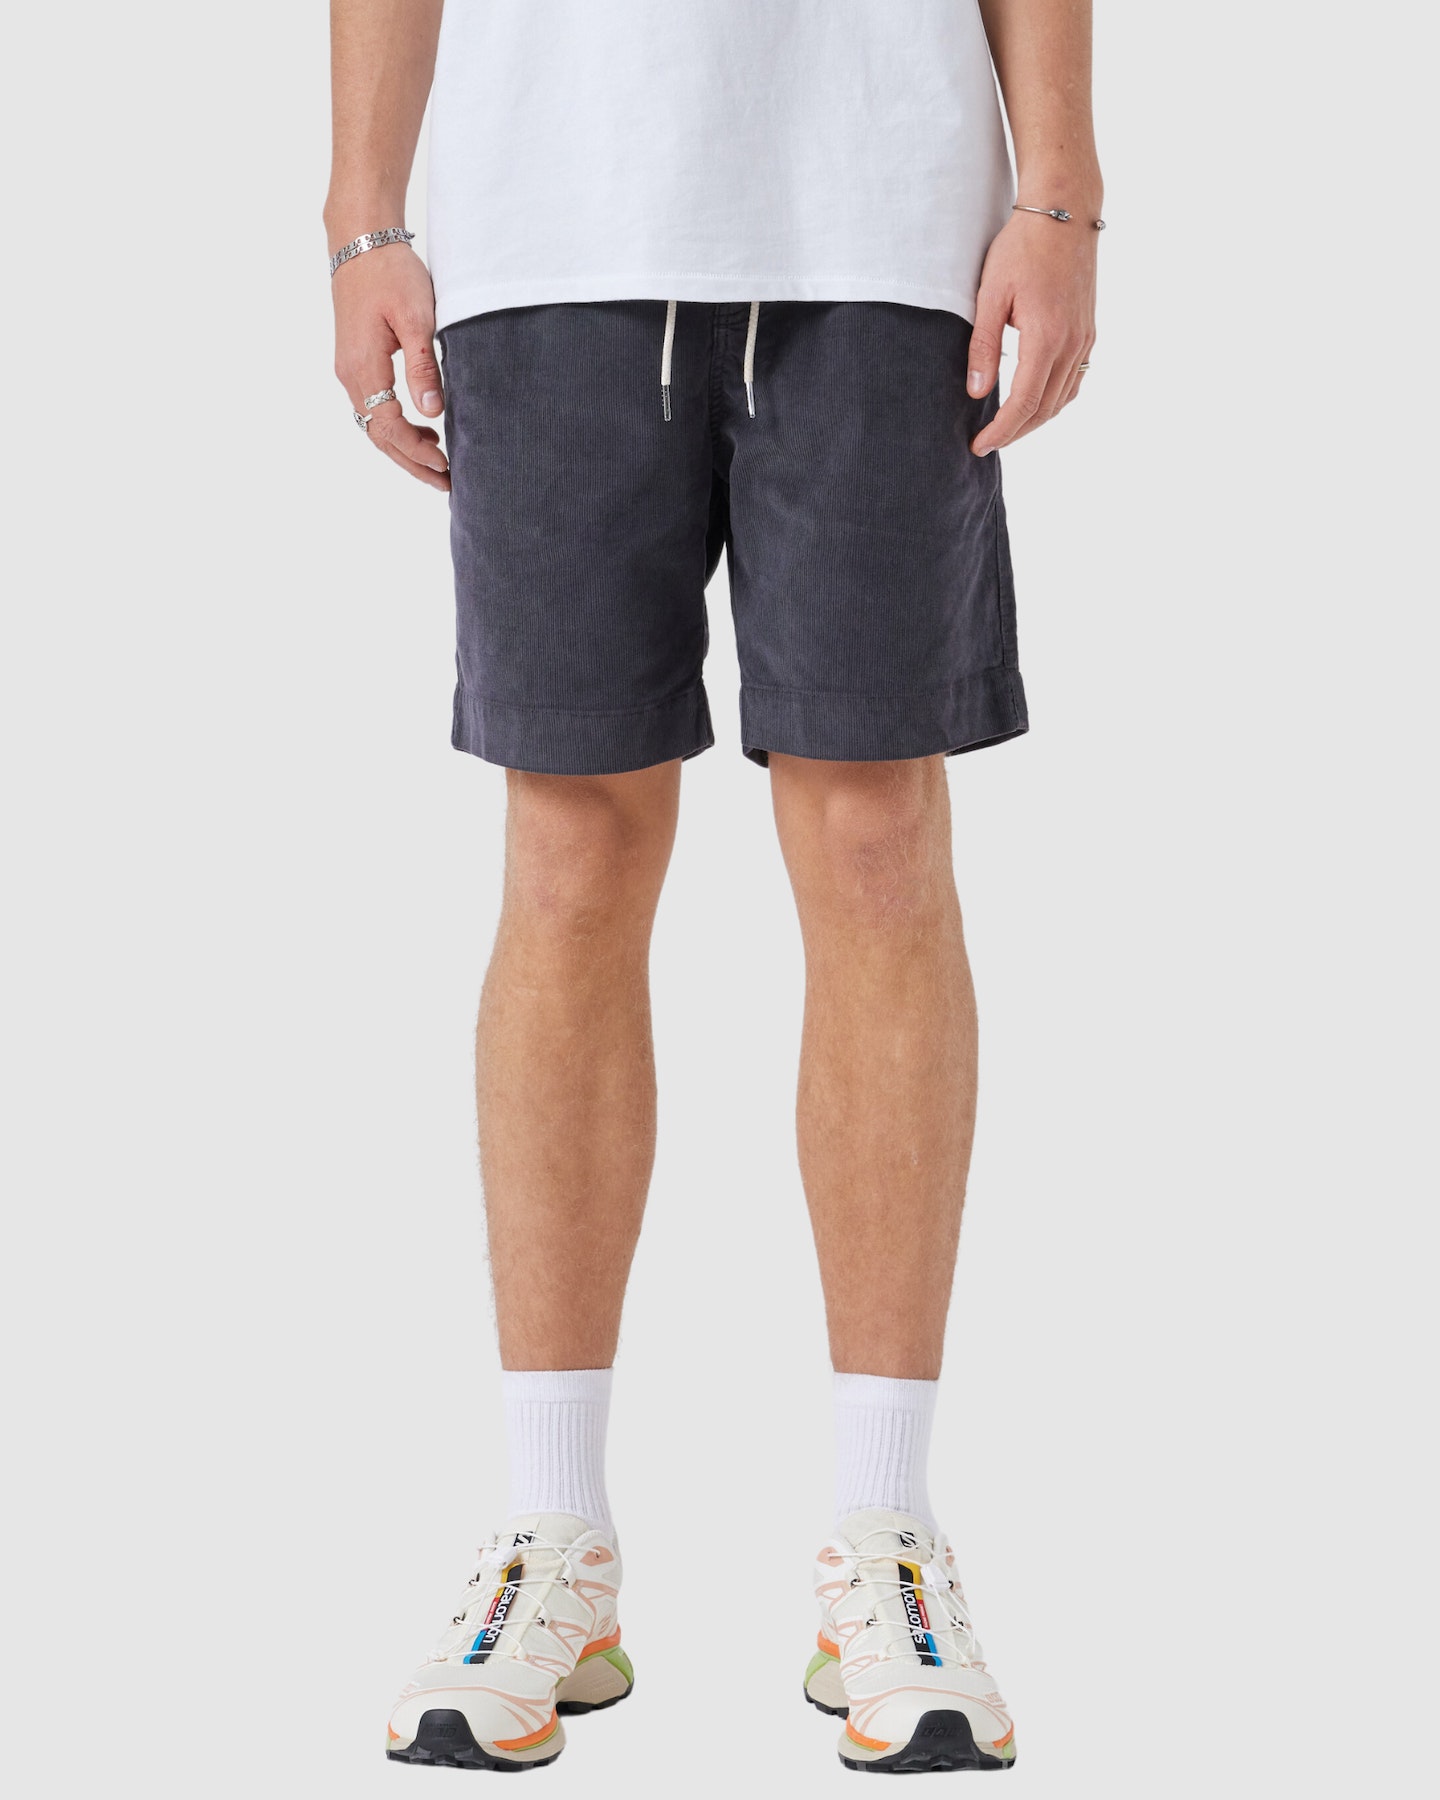 Barney Cools B.Relaxed Short - Washed Black Corduroy | SurfStitch